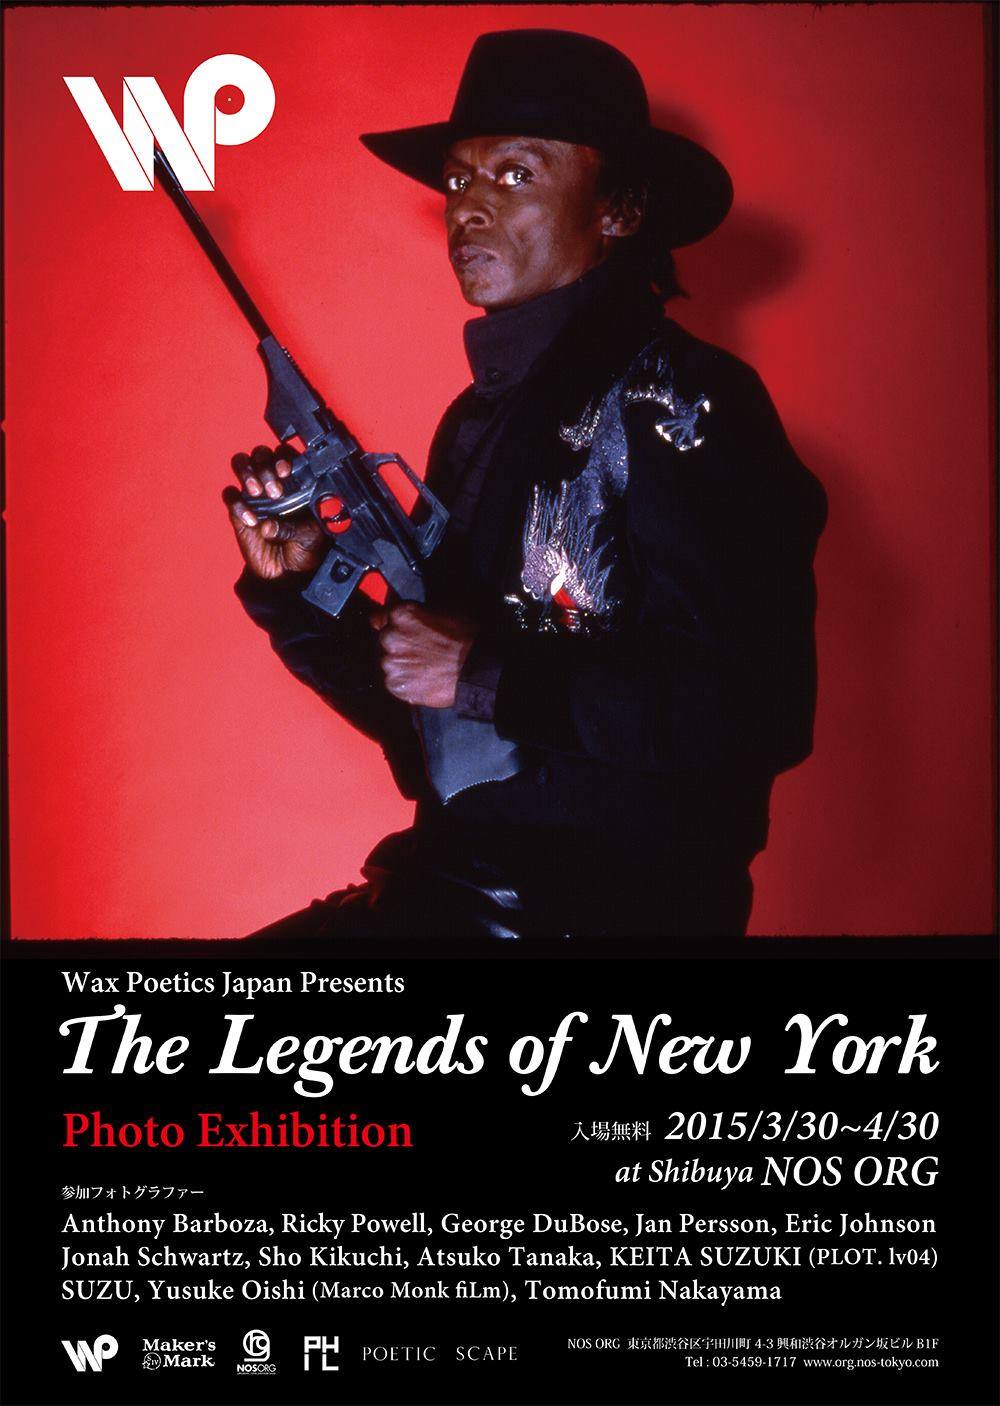  The Legends of New York  Group Exhibition  by&nbsp;Wax Poetics Japan  @ Nos Shibuya  3/30-5/13/2015  Poster Image 